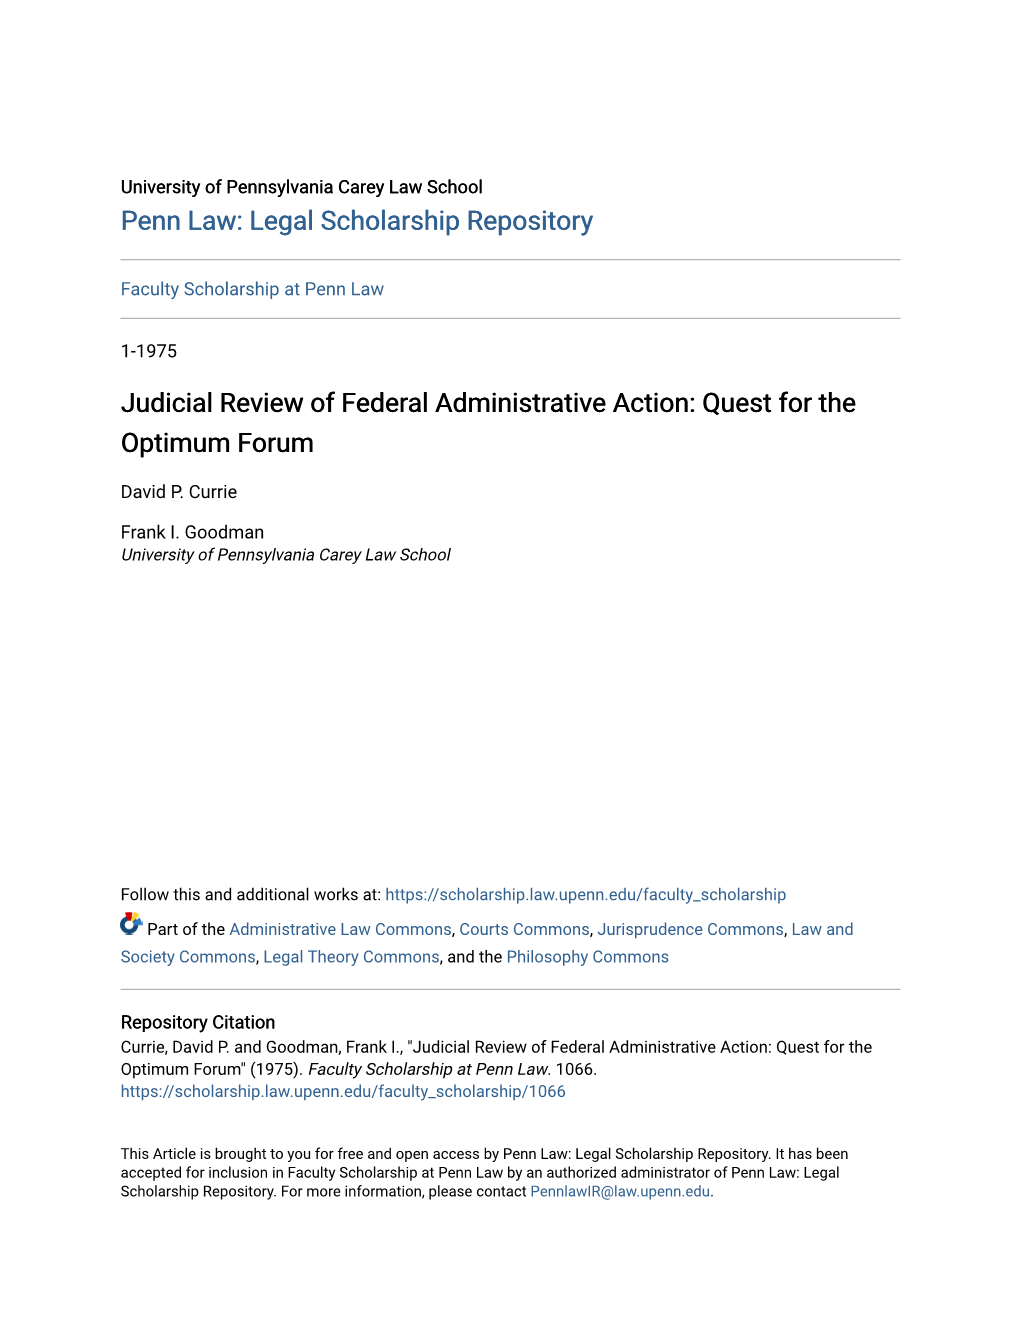 Judicial Review of Federal Administrative Action: Quest for the Optimum Forum